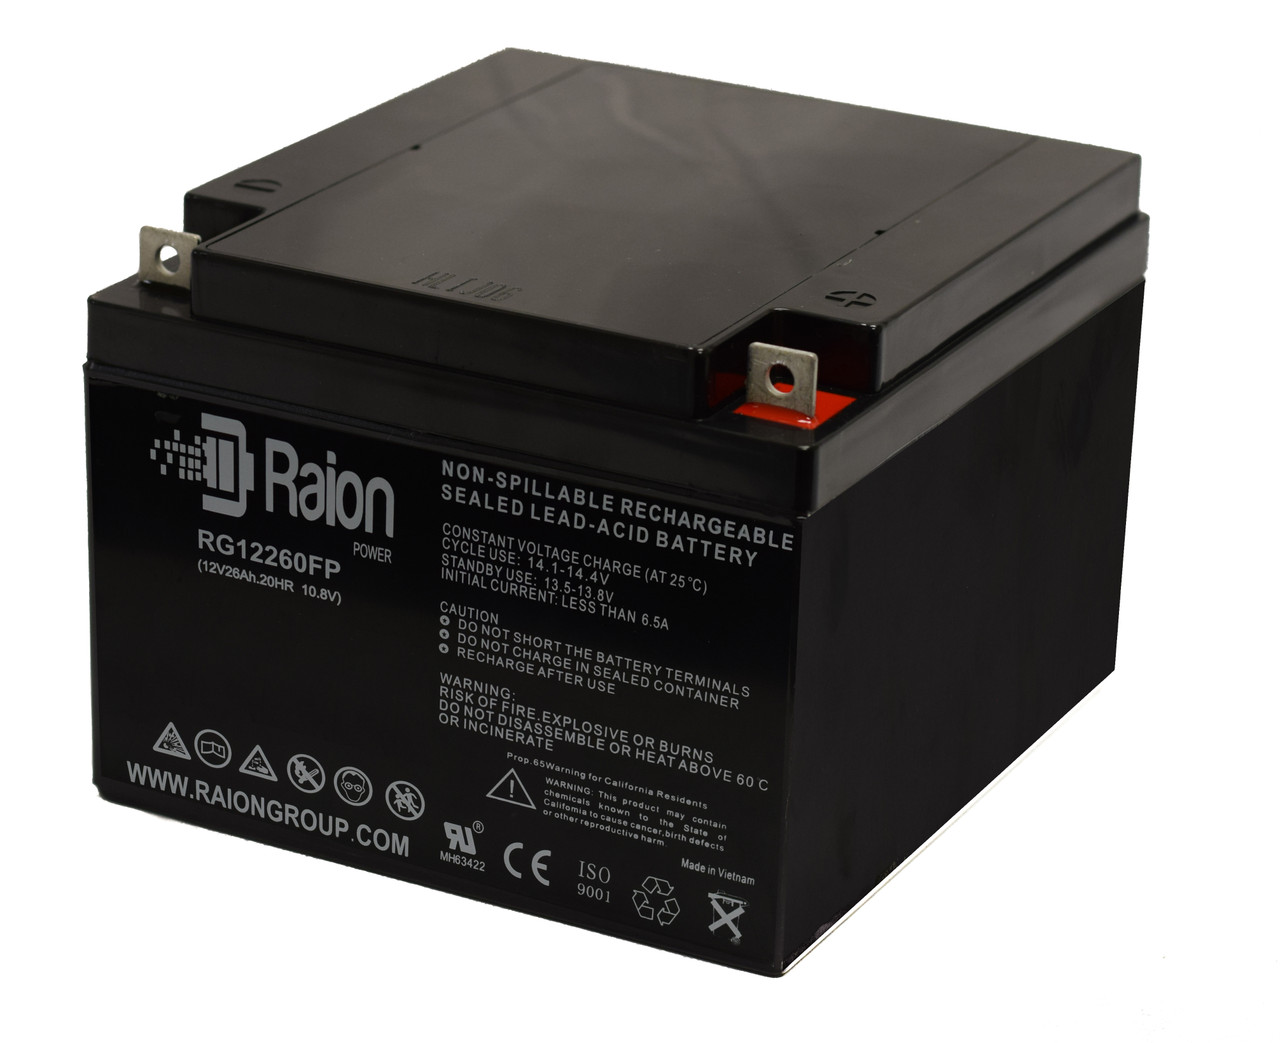 Raion Power Replacement 12V 26Ah Battery for Chiway SJ12V28Ah - 1 Pack